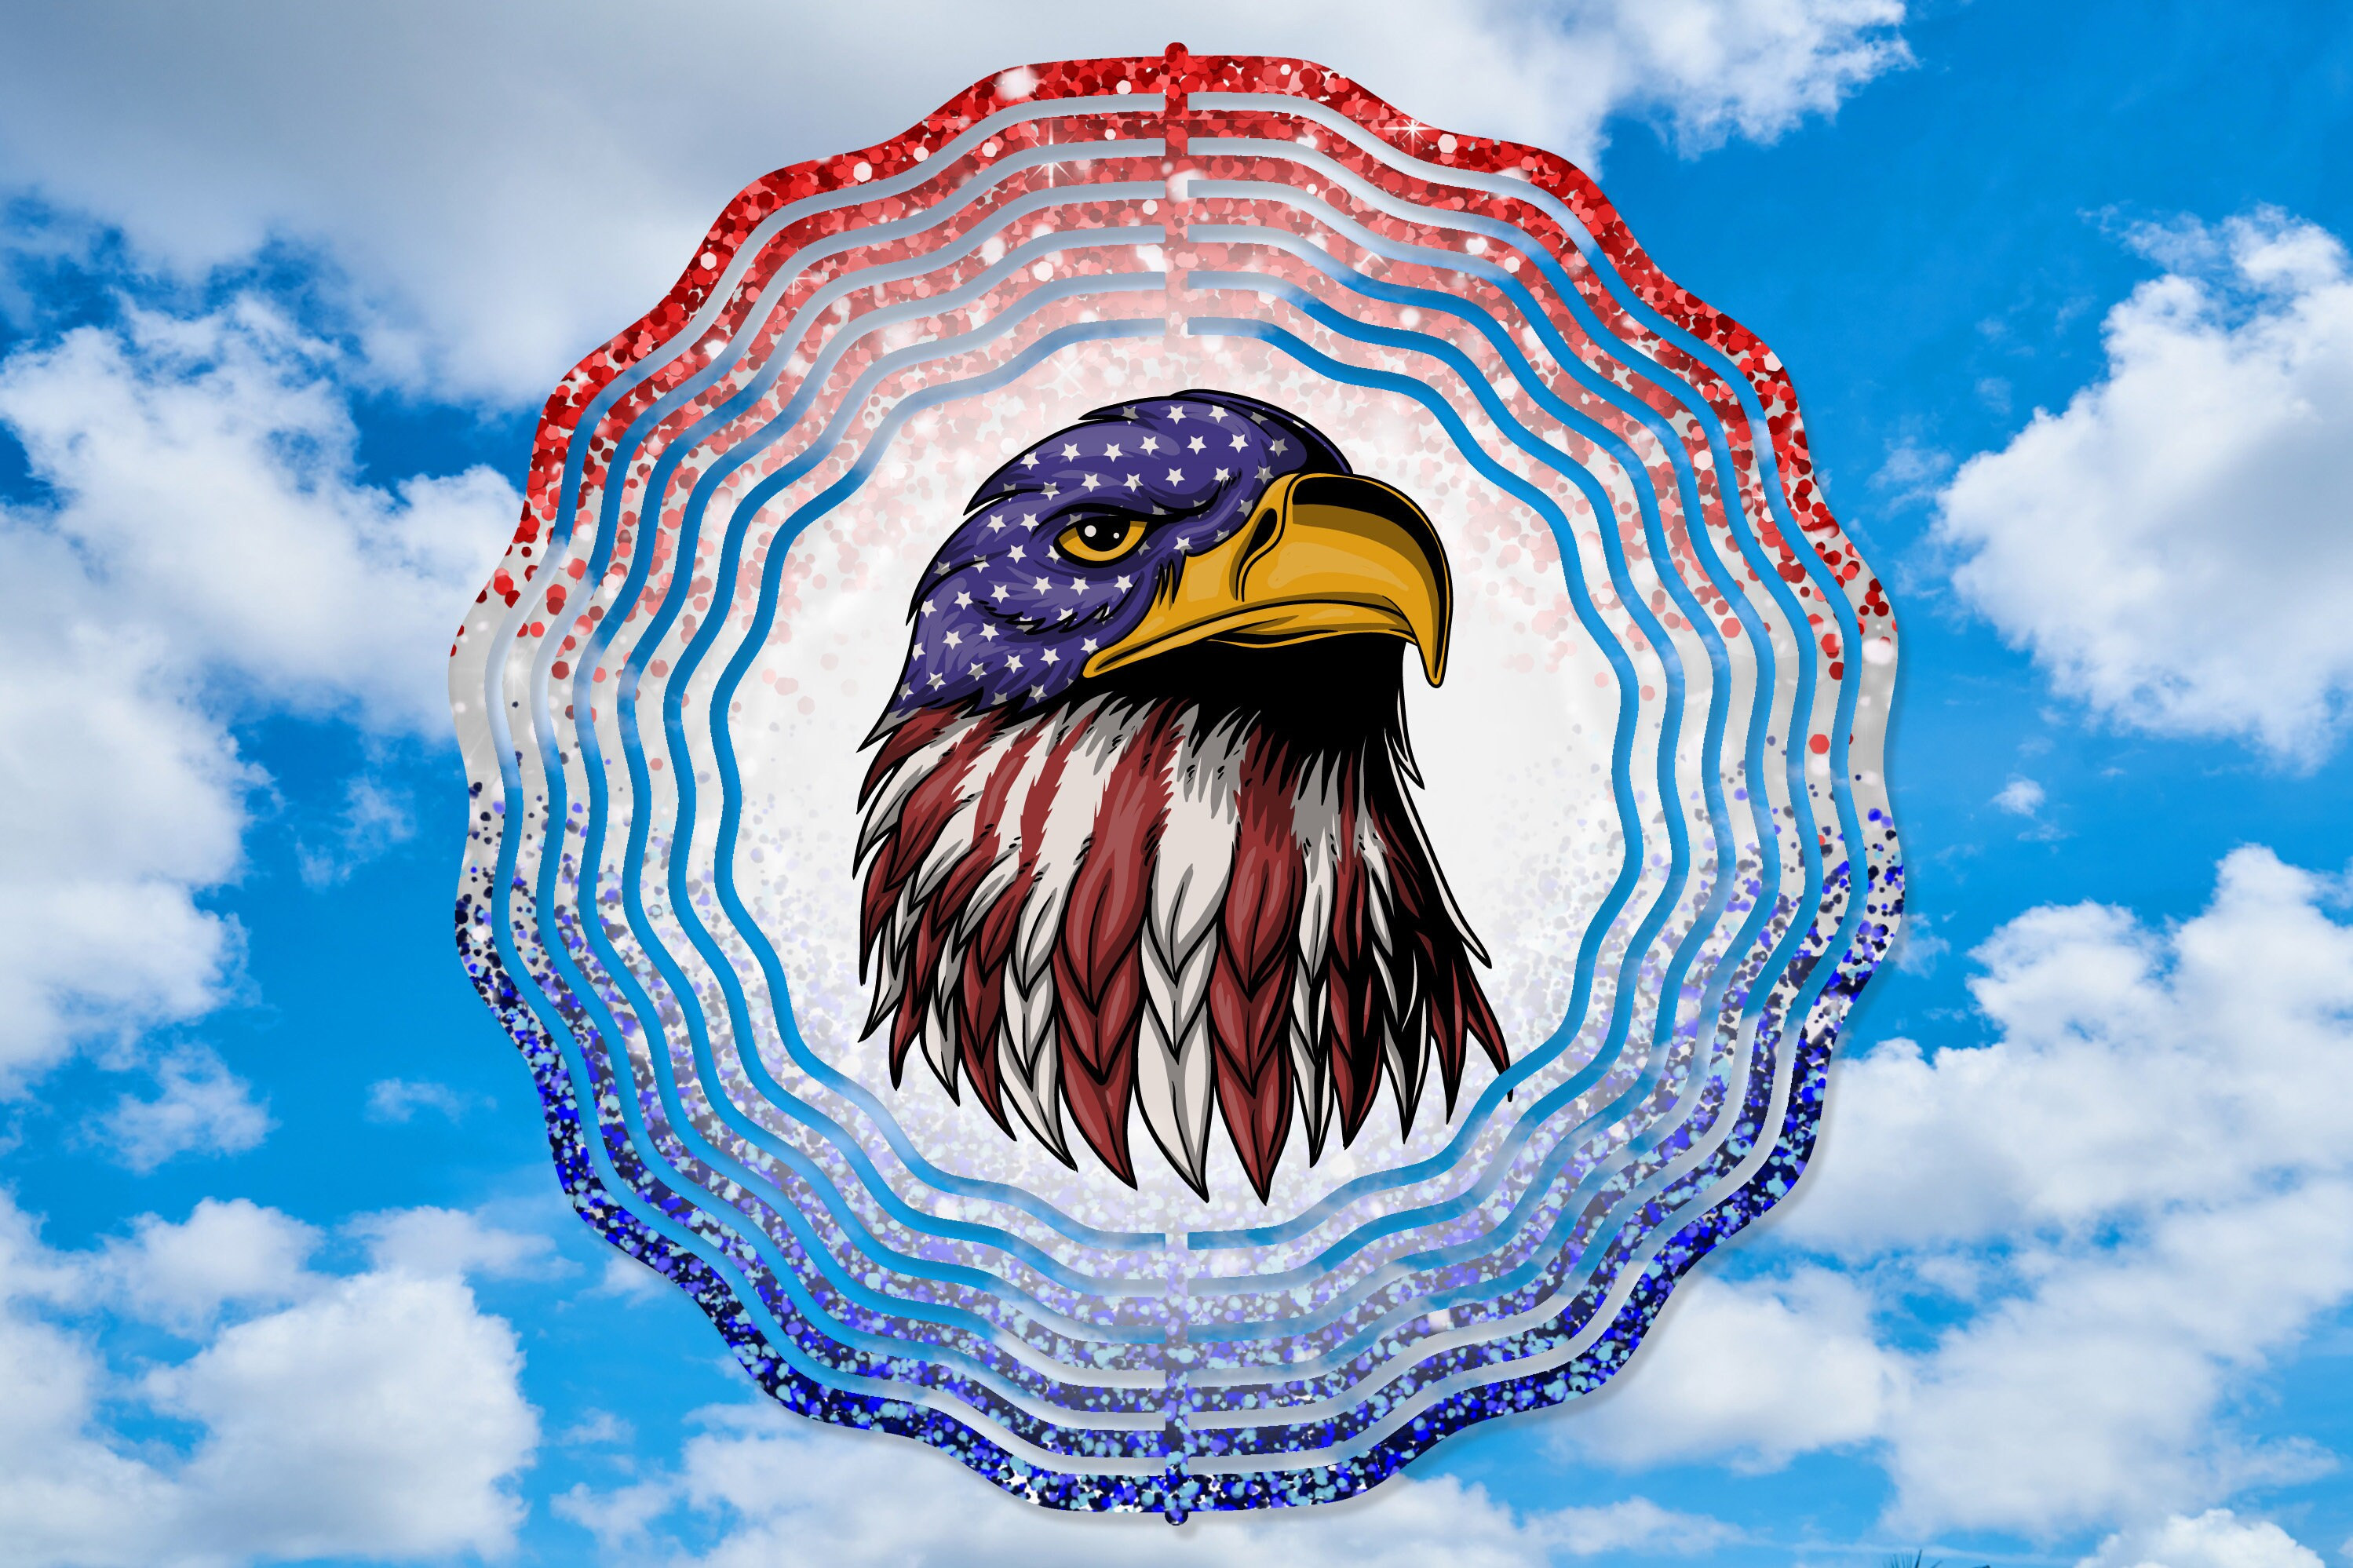 Red White And Blue Bald Eagle Wind Spinner For Yard And Garden, Outdoor Garden Yard Decoration, Garden Decor, Chime Art Gift